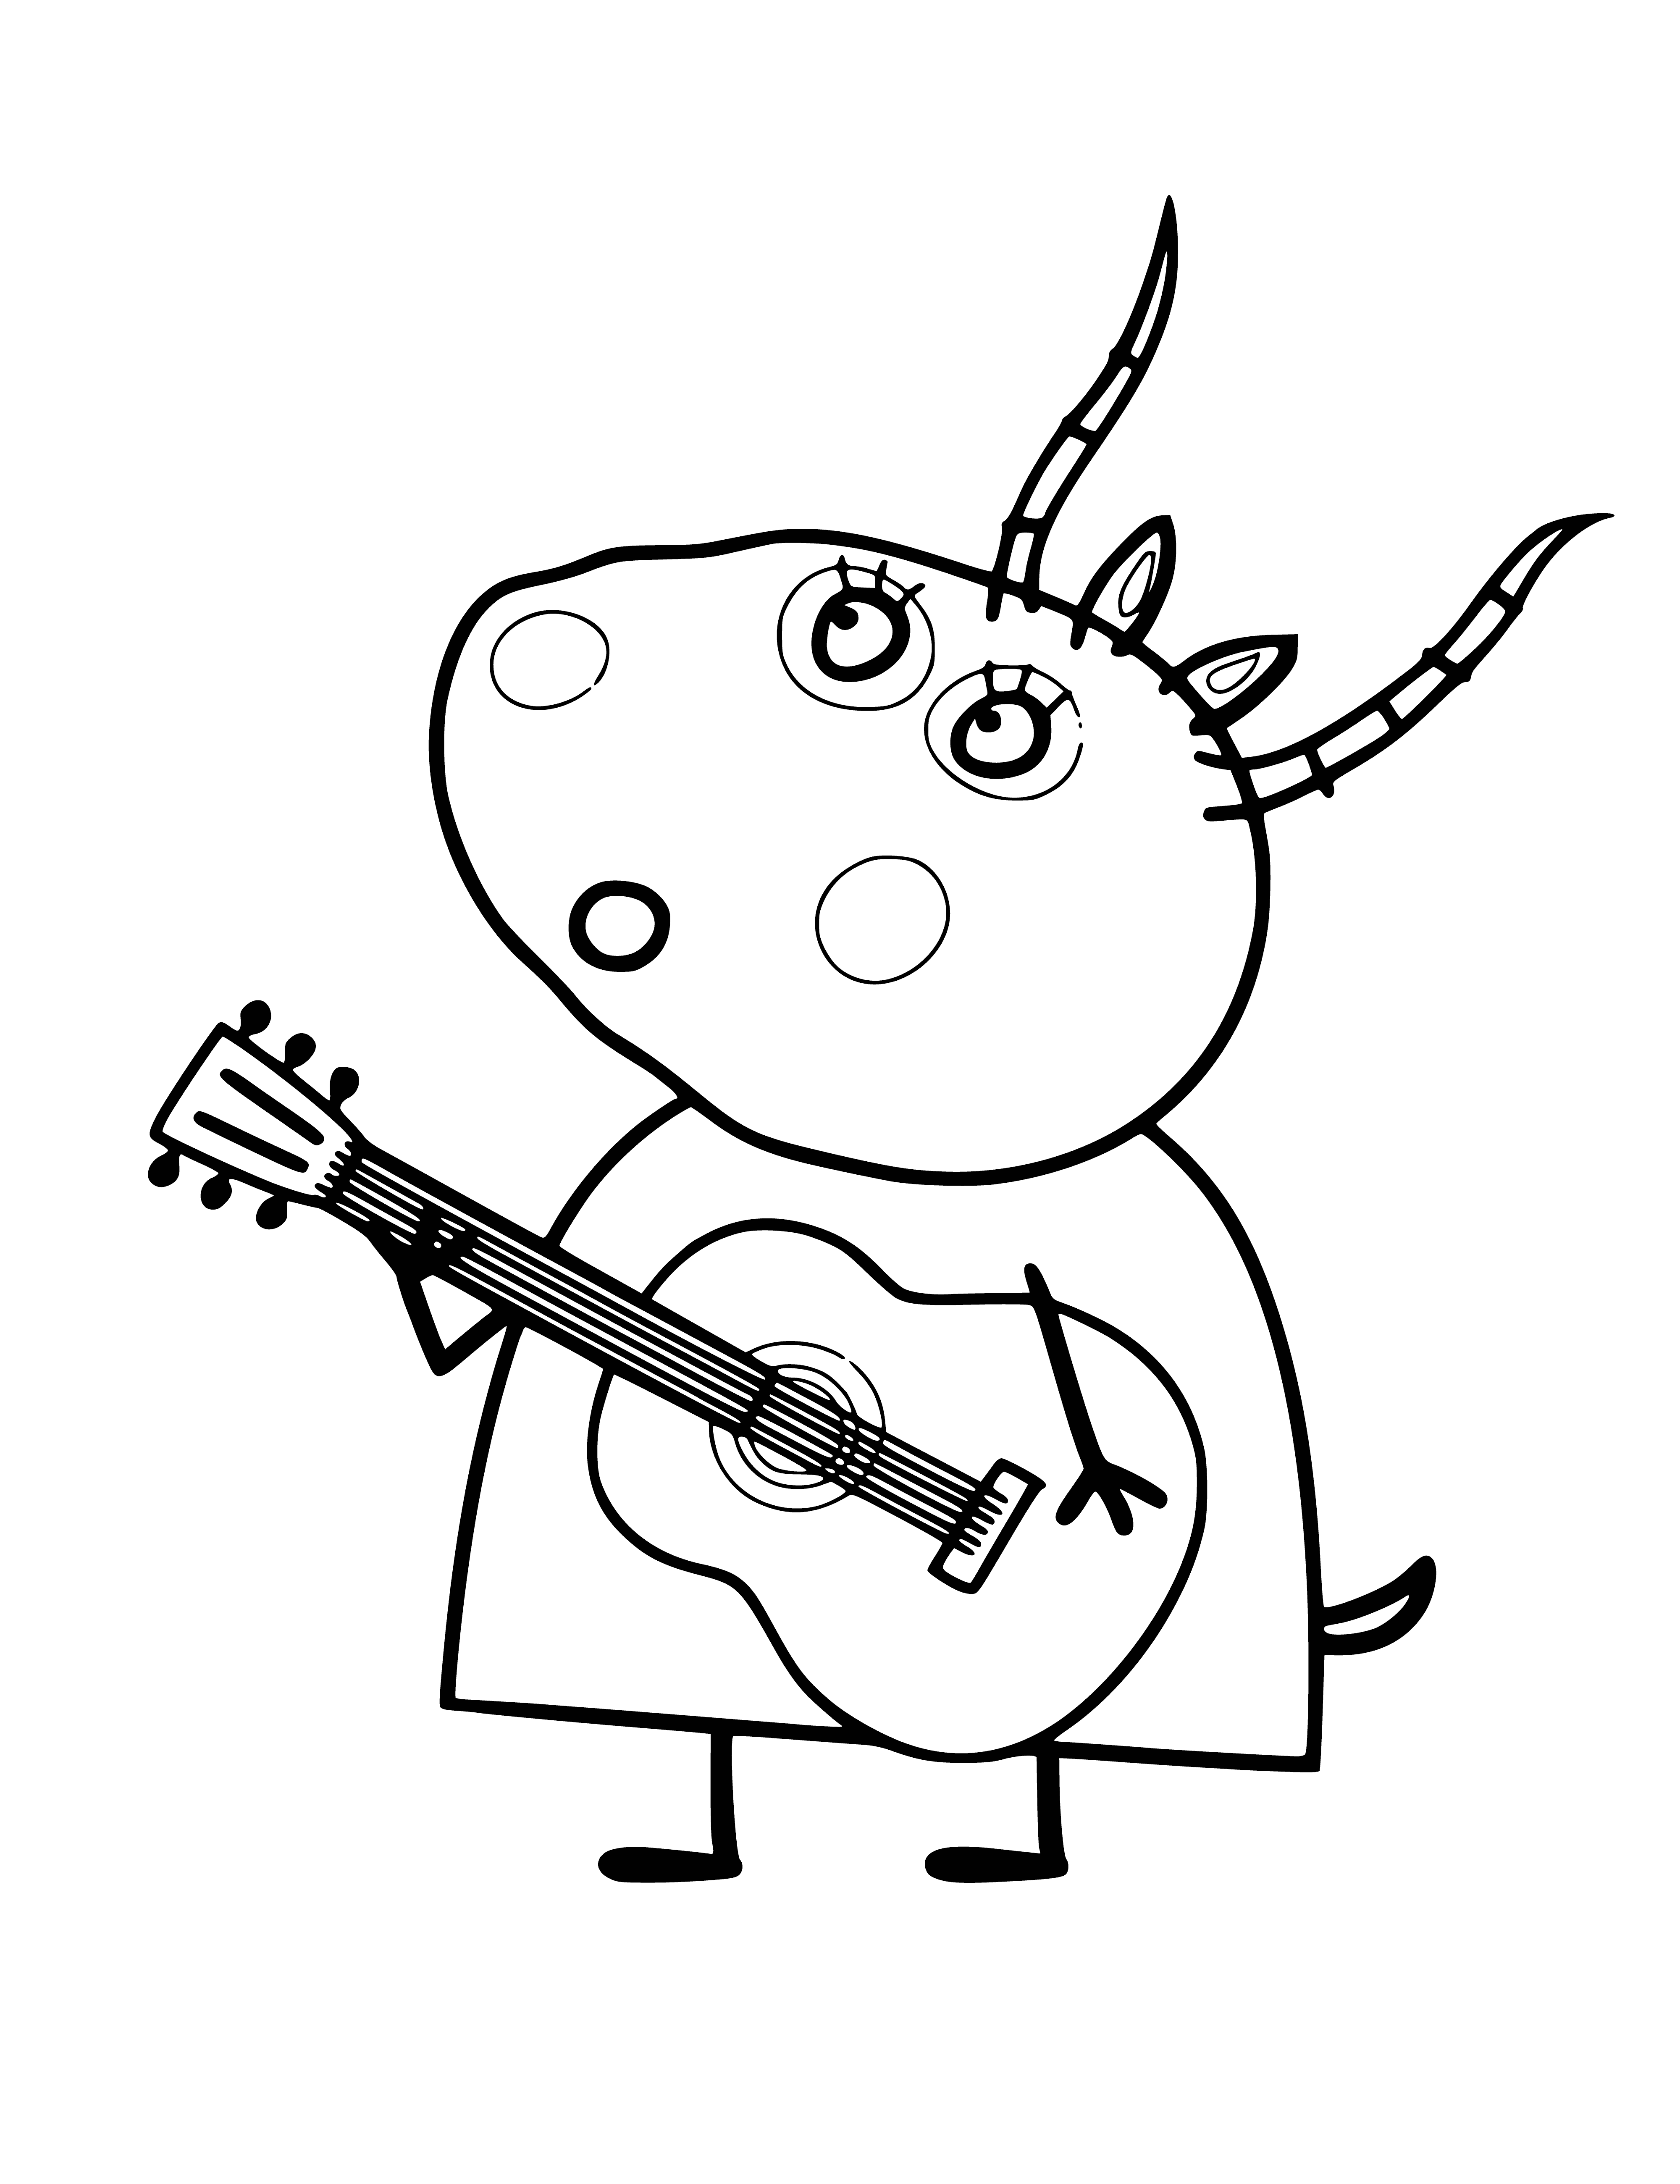 Madame Gazelle with a guitar coloring page